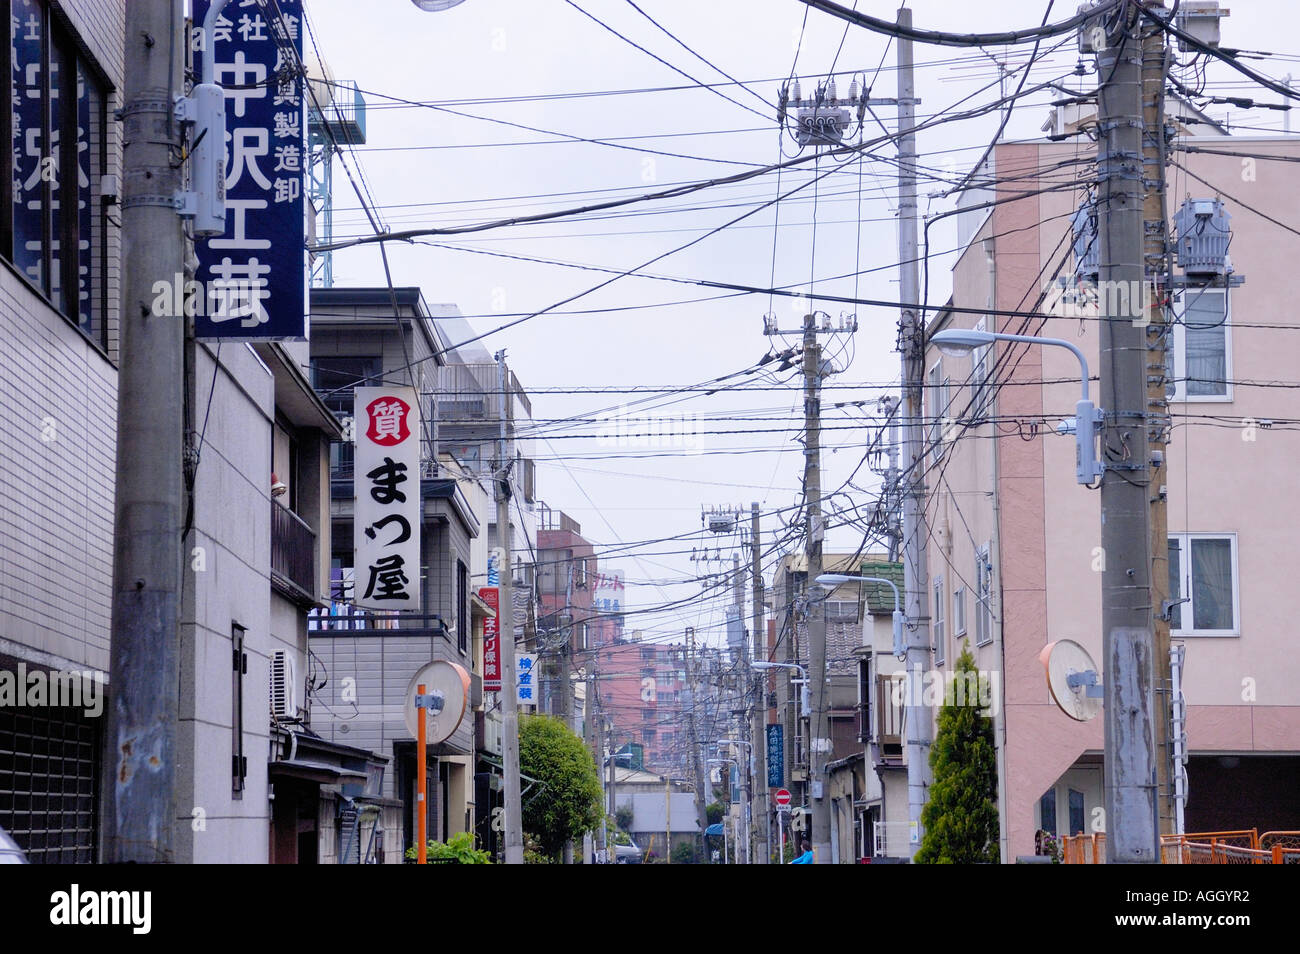 electric-cables-over-street-tokyo-japan-AGGYR2.jpg